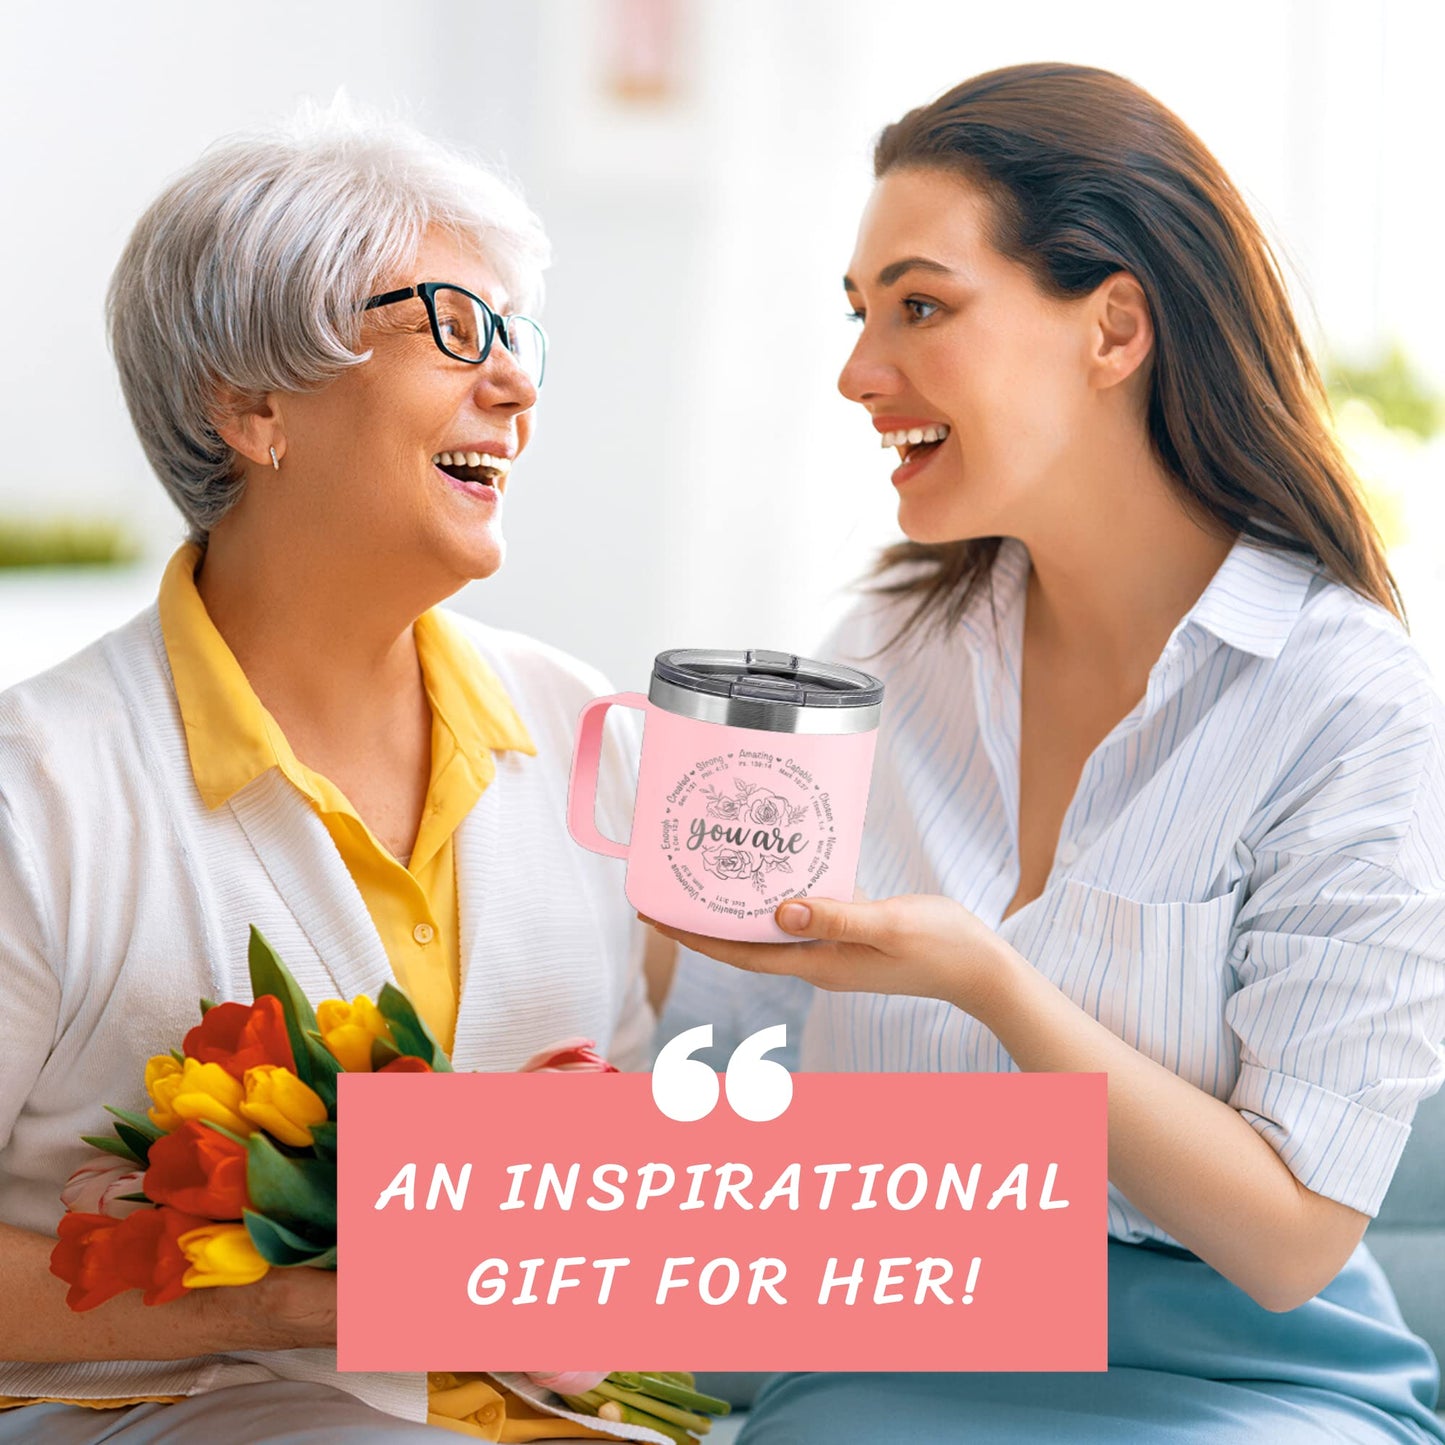 Christian Gifts for Women - Religious Gifts for Women - Birthday Gifts for Mom, Grandma, Sister, Friend, Coworker, Women - Mothers Day Gifts - Inspirational Spiritual Catholic Gifts Women - 14 Oz Mug